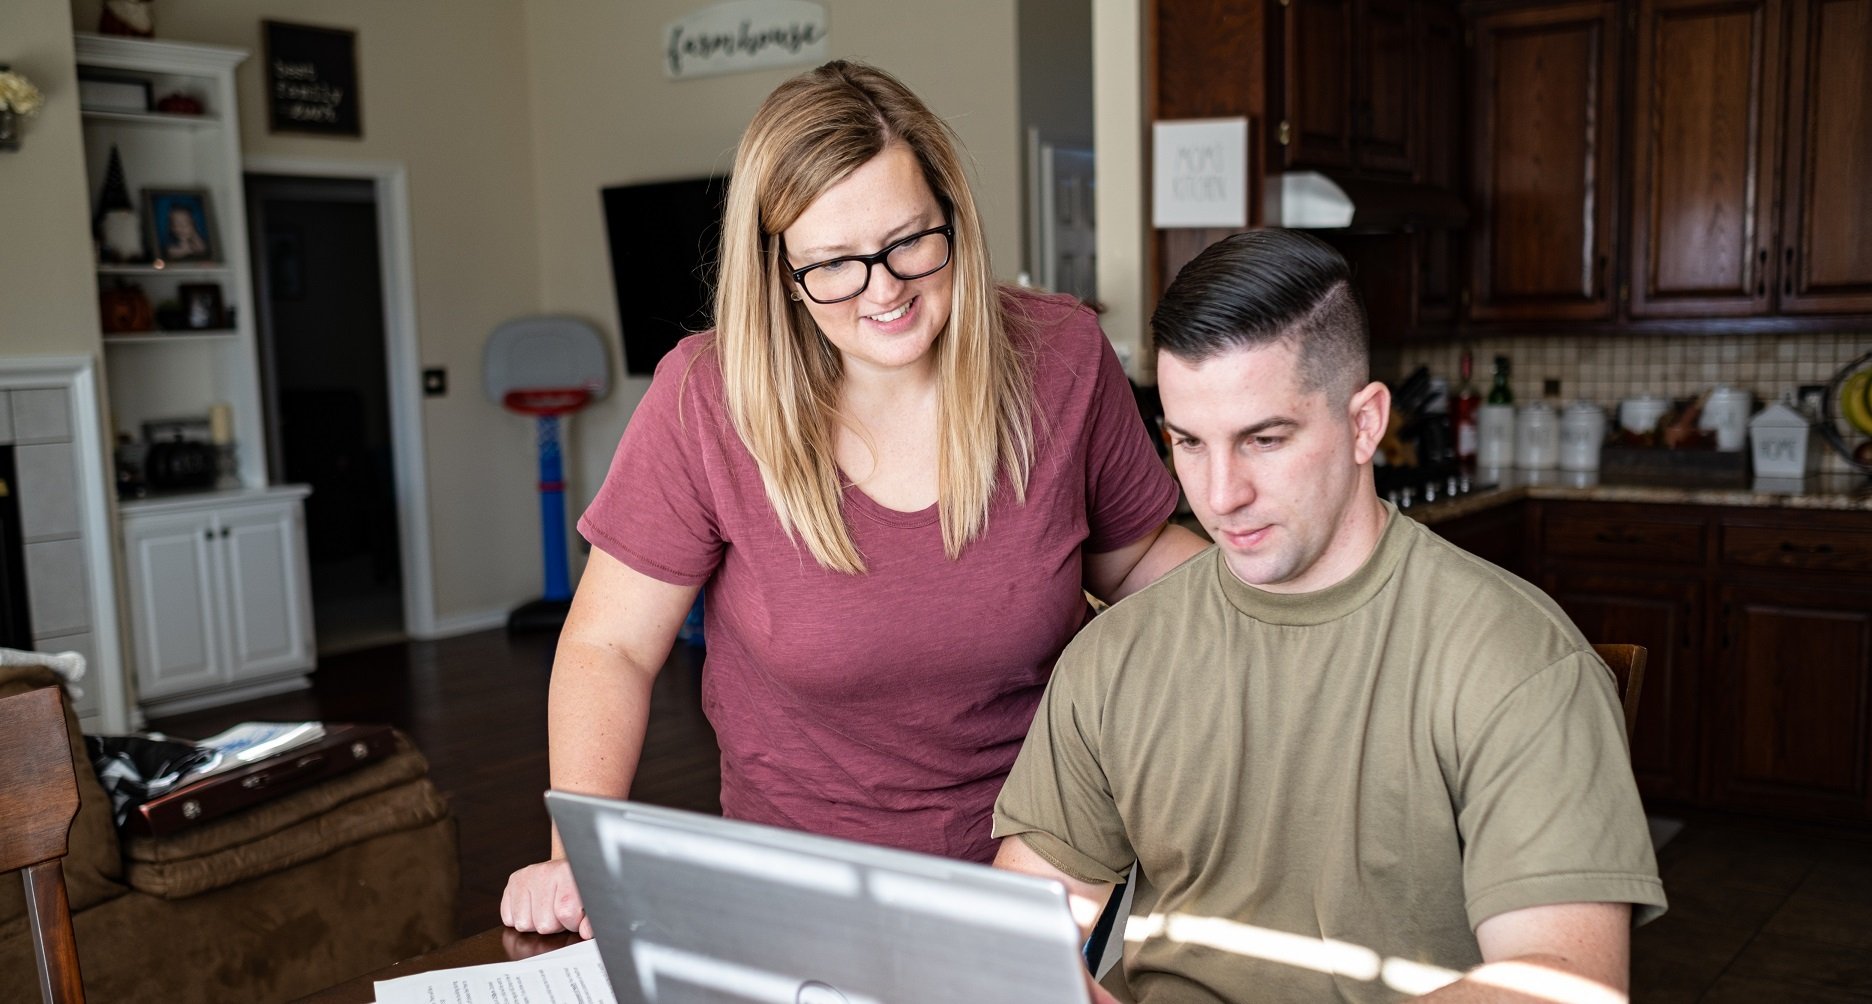 Military couple looking at laptop smiling